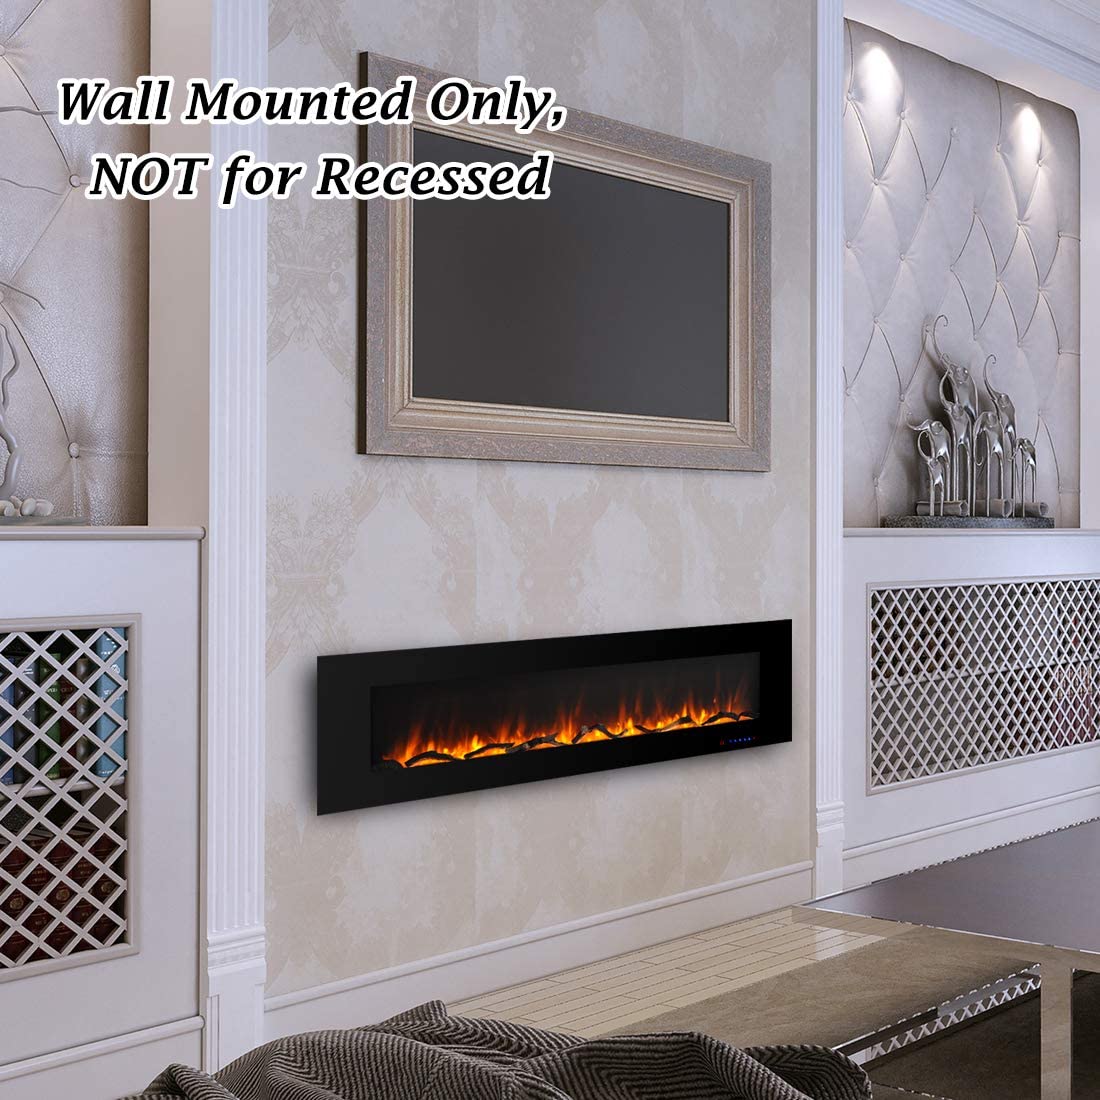 Valuxhome WM72 72 in. 750/1500W Wall Mounted Log and Crystals Fireplace with Remote Black New